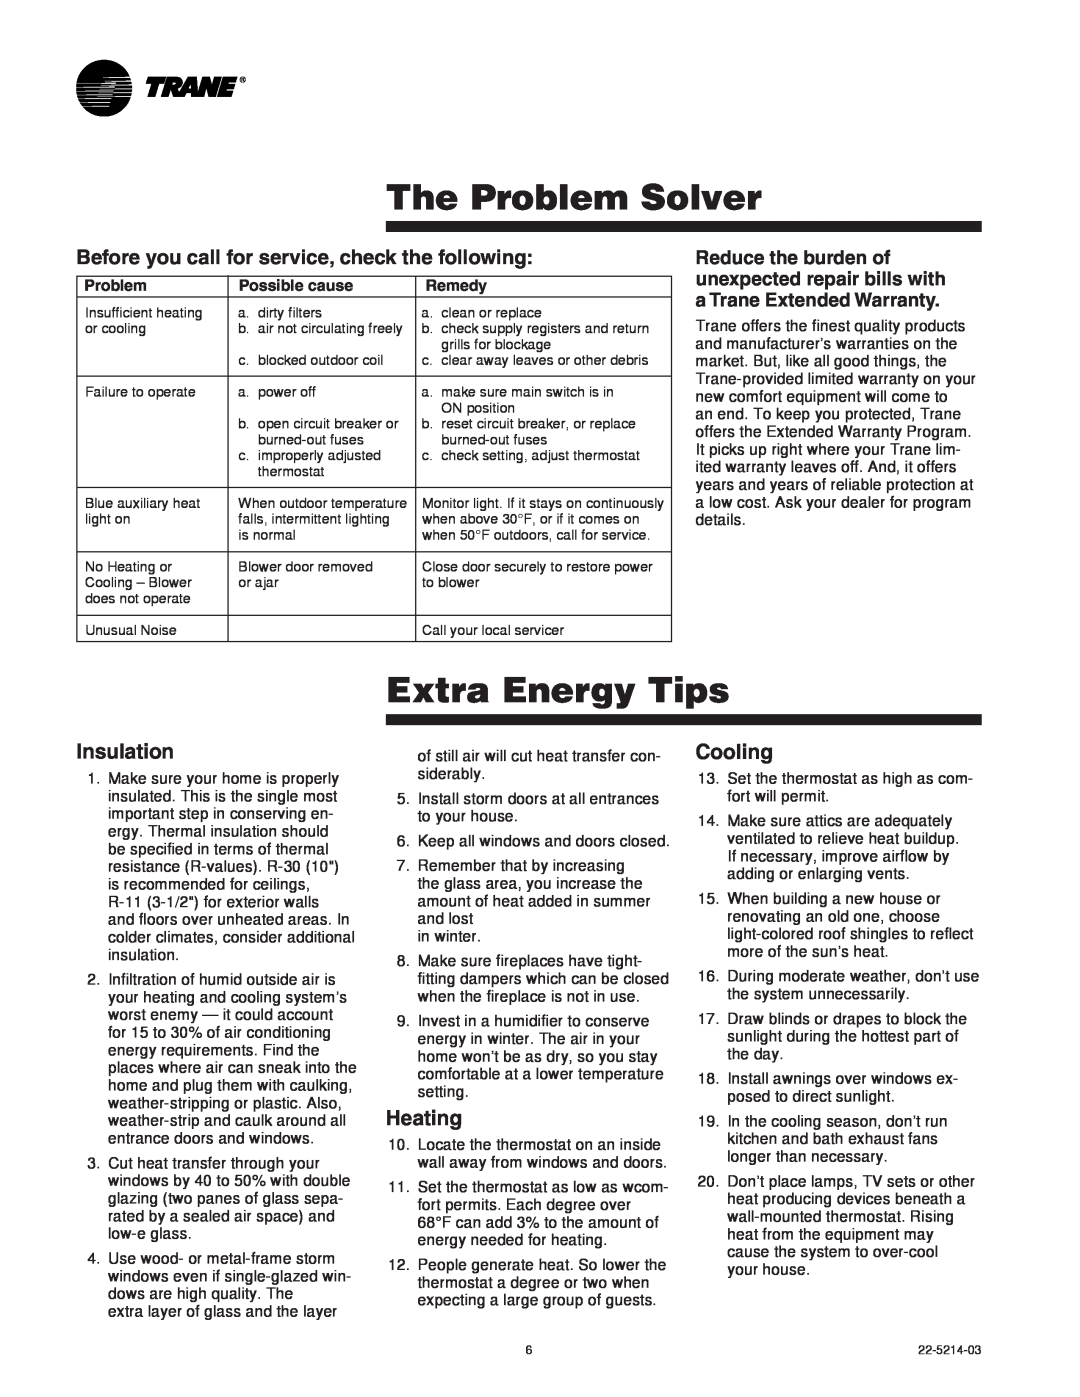 Trane 22-5214-03 manual The Problem Solver, Extra Energy Tips, Insulation, Heating, Cooling 